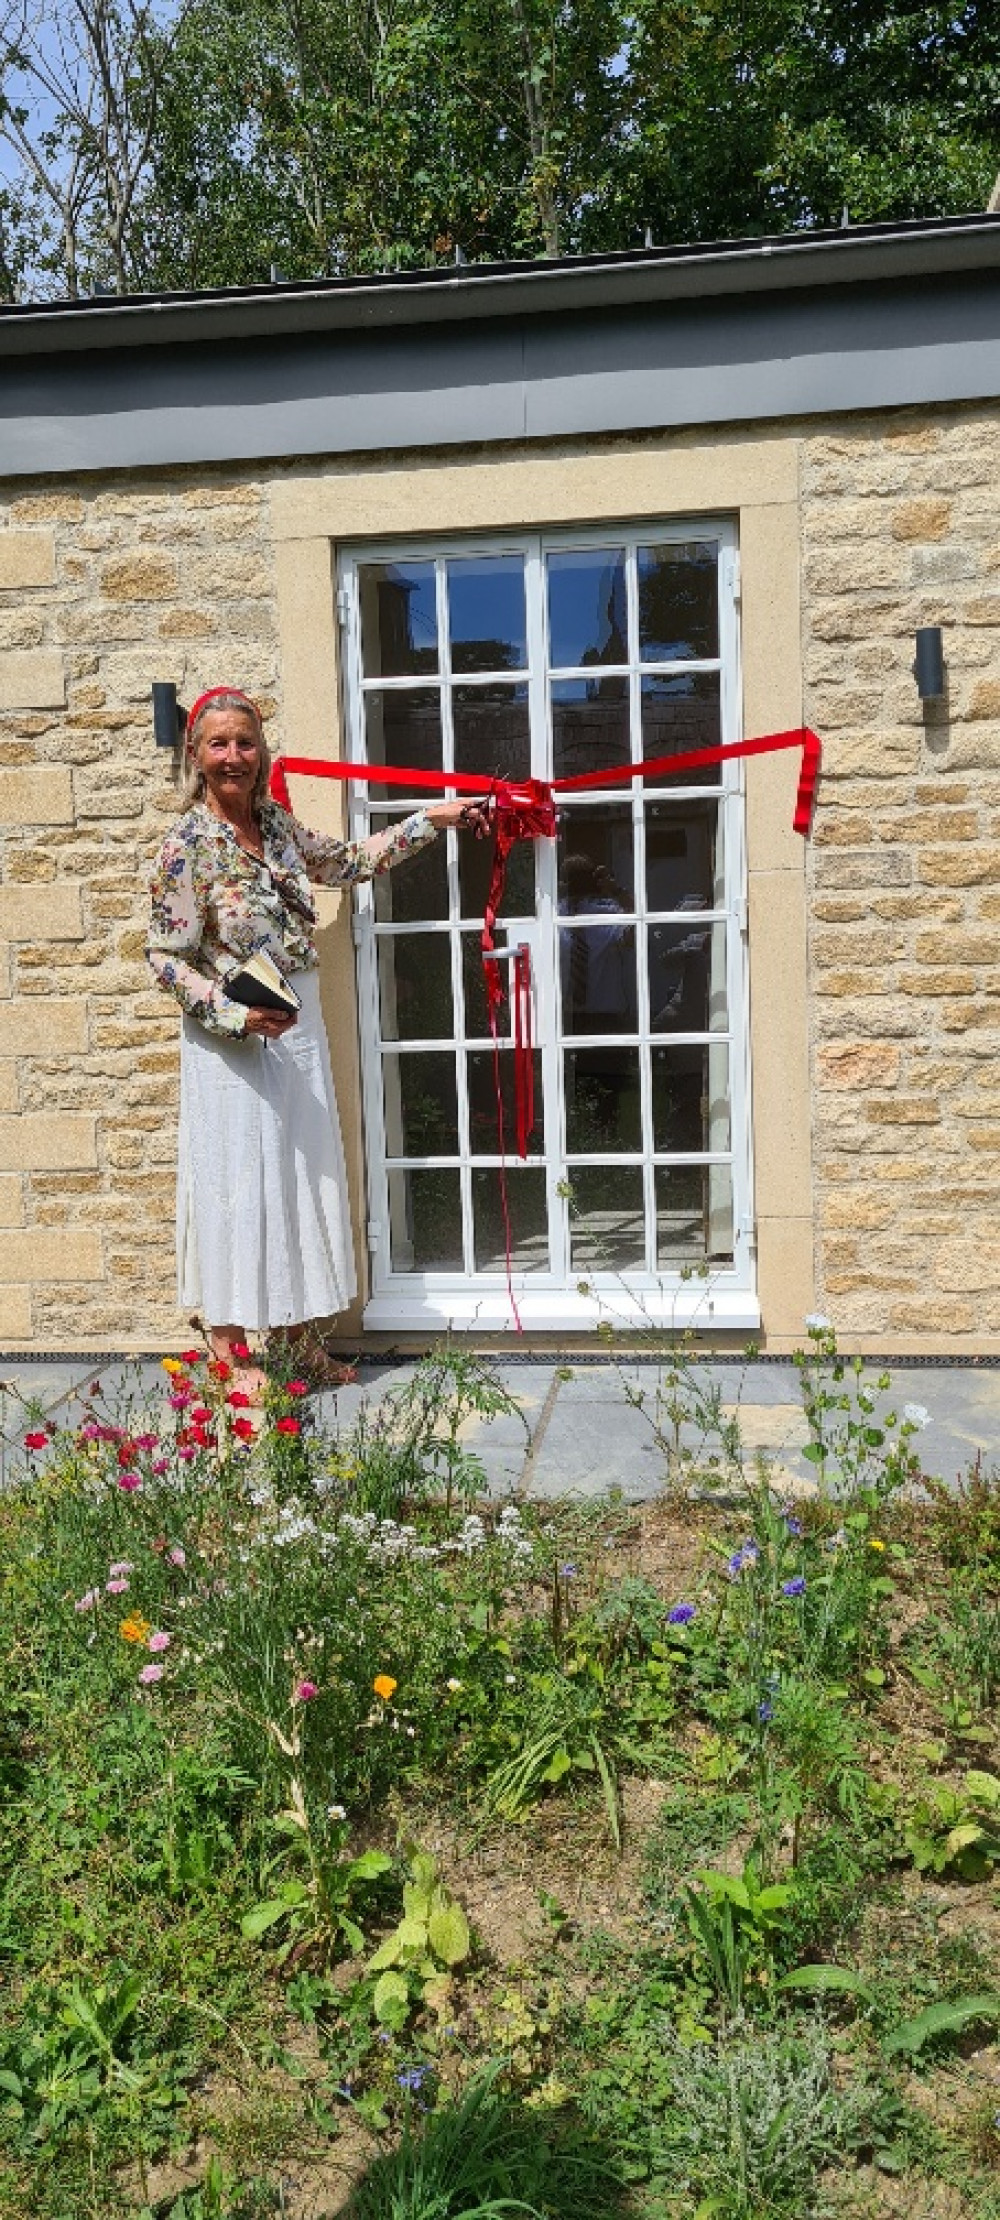 Miriam Cheal, Chairman of the Blue House Trustees, cuts the ribbon in the opening ceremony on 01 August, attended by Trustees, residents, consultants and contractors].   